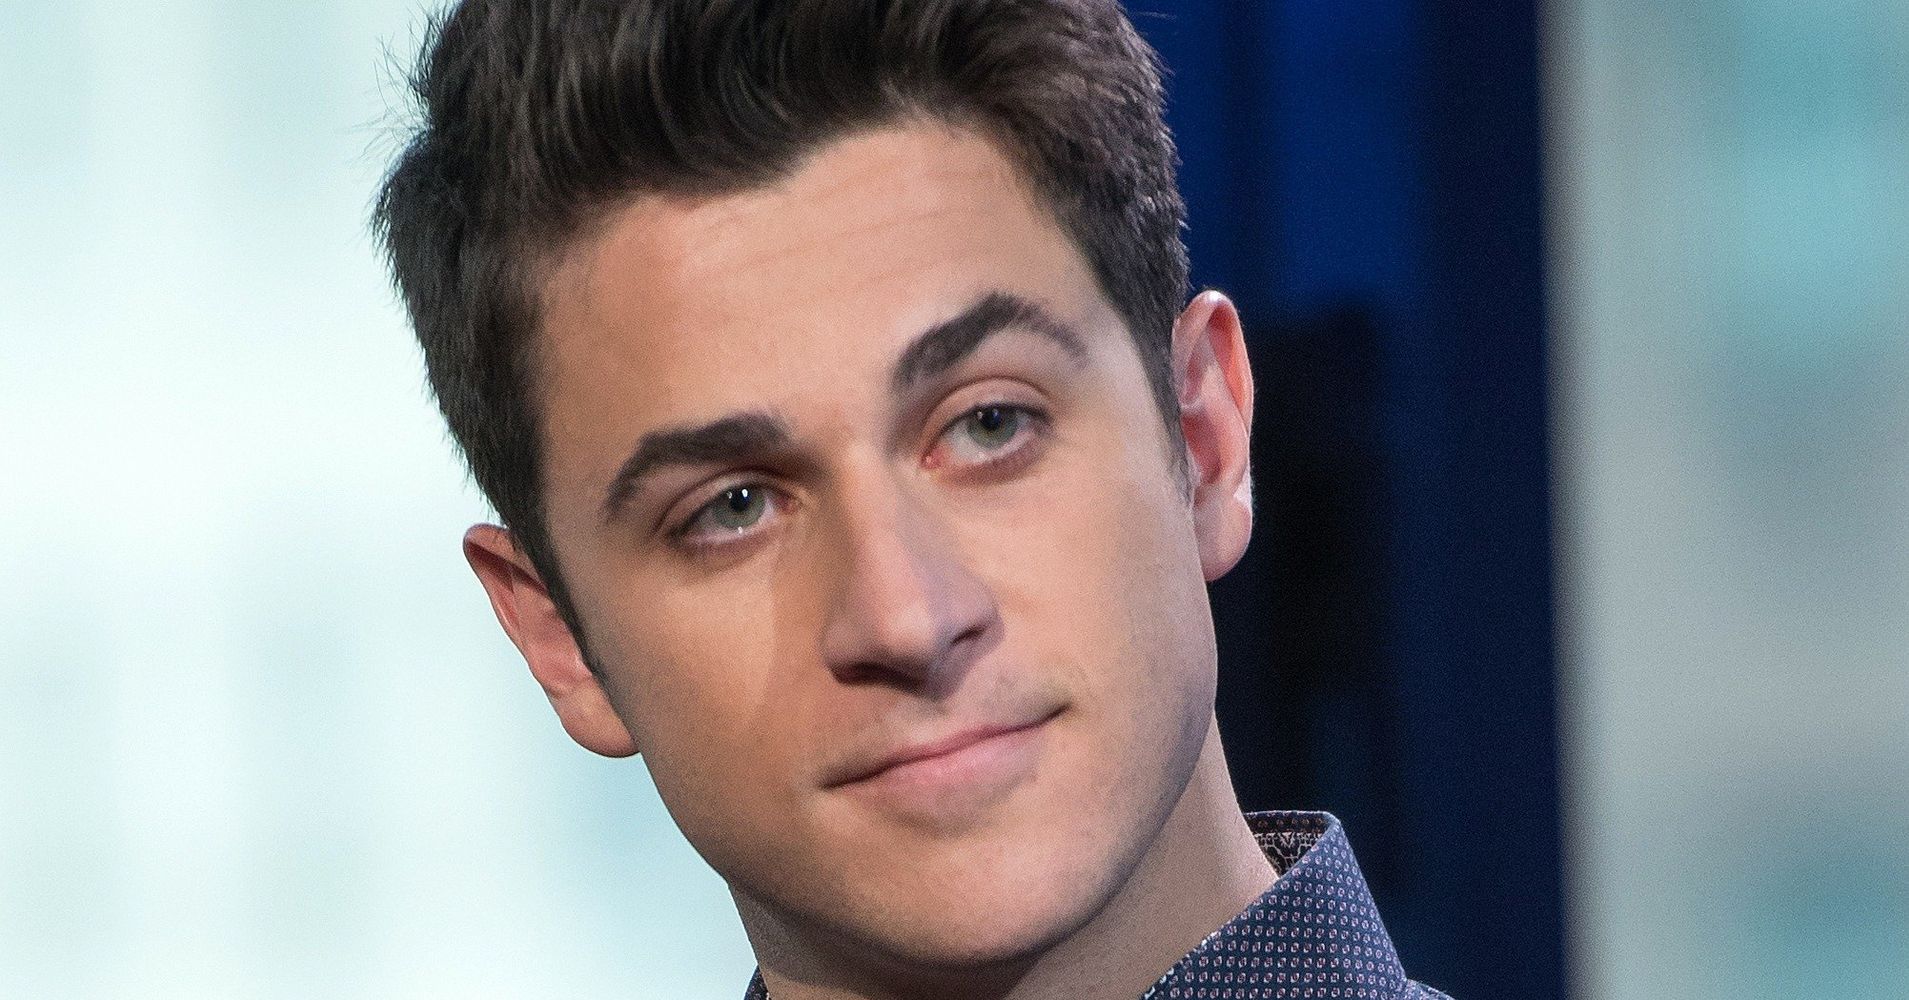 Wizards Of Waverly Place Star David Henrie Has Been Secretly Engaged